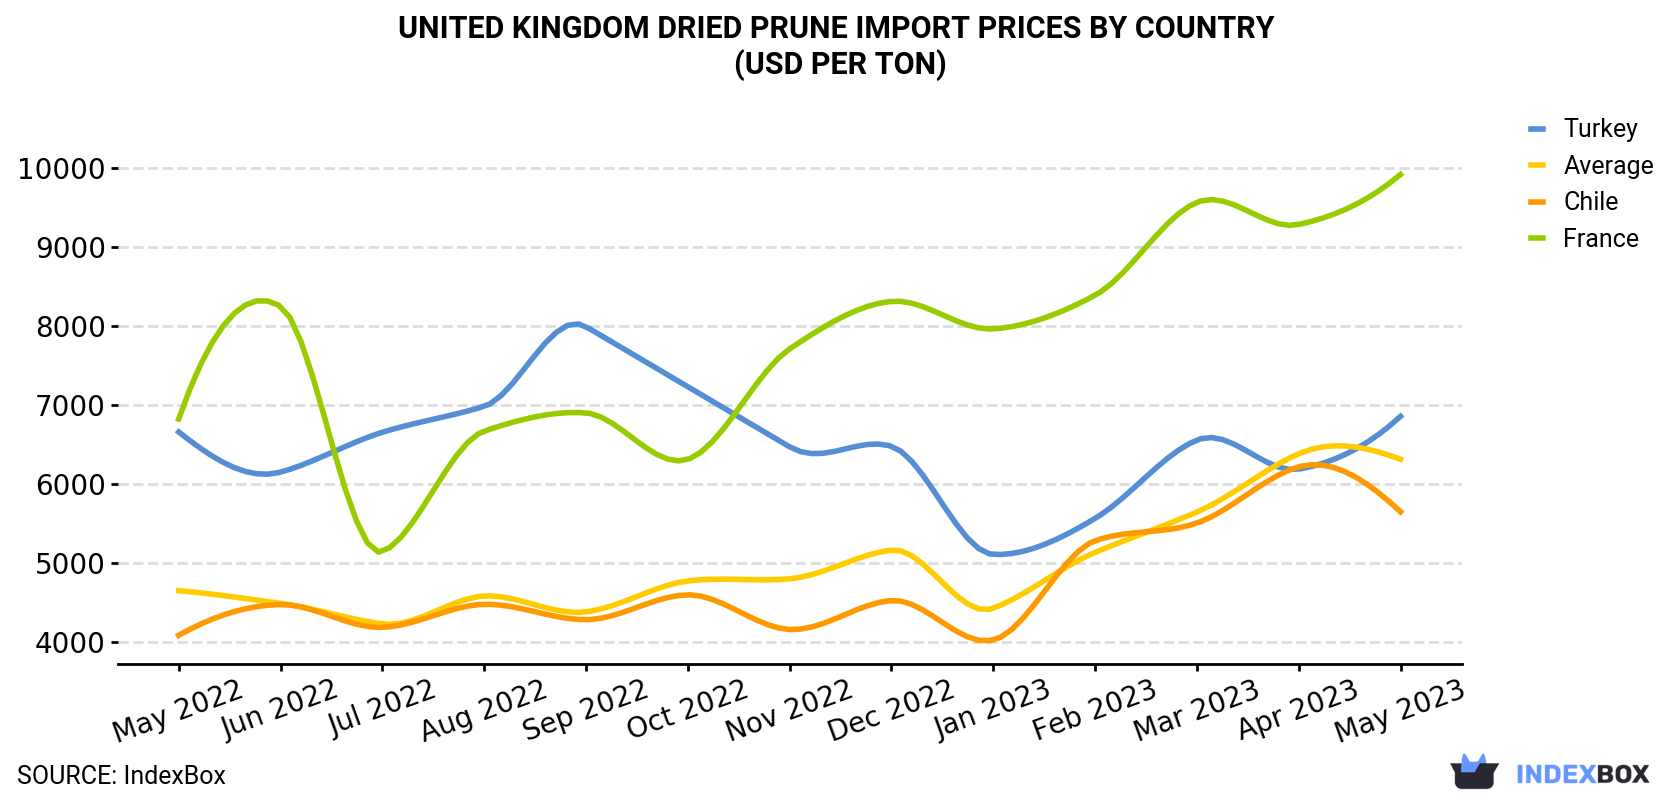 United Kingdom Dried Prune Import Prices By Country (USD Per Ton)